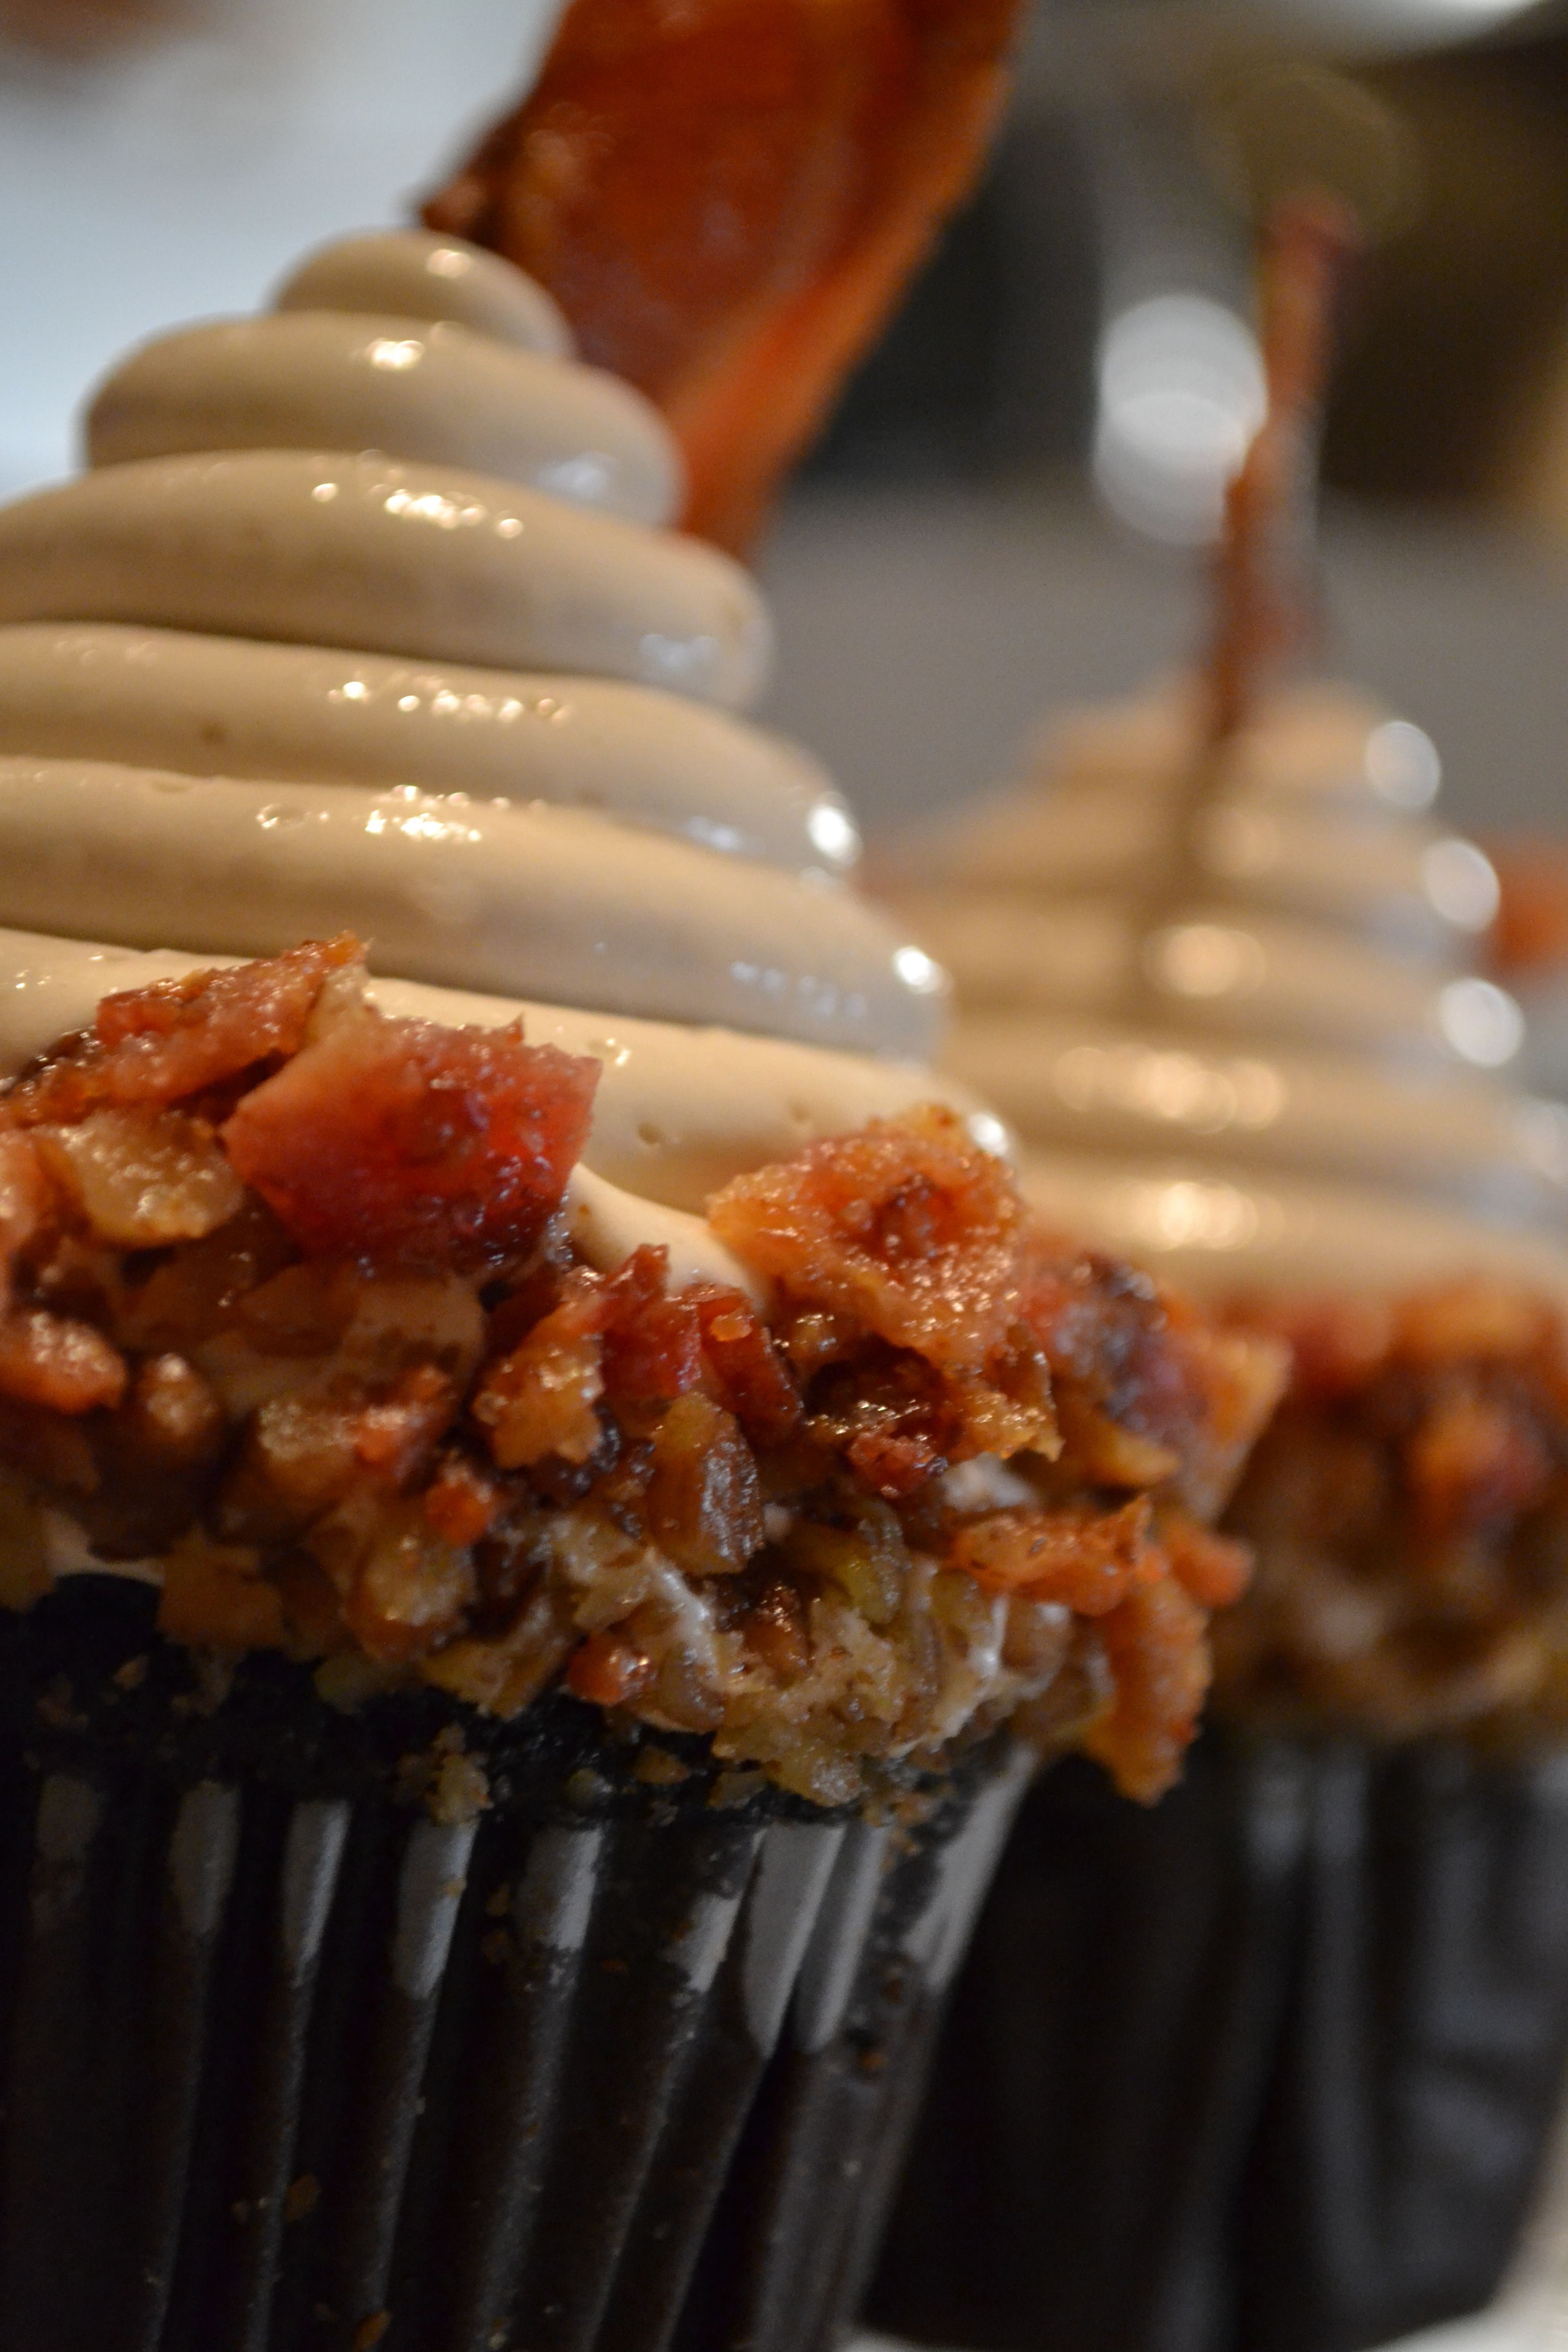 Maybe a manly birthday option- Maple Bacon Cupcakes